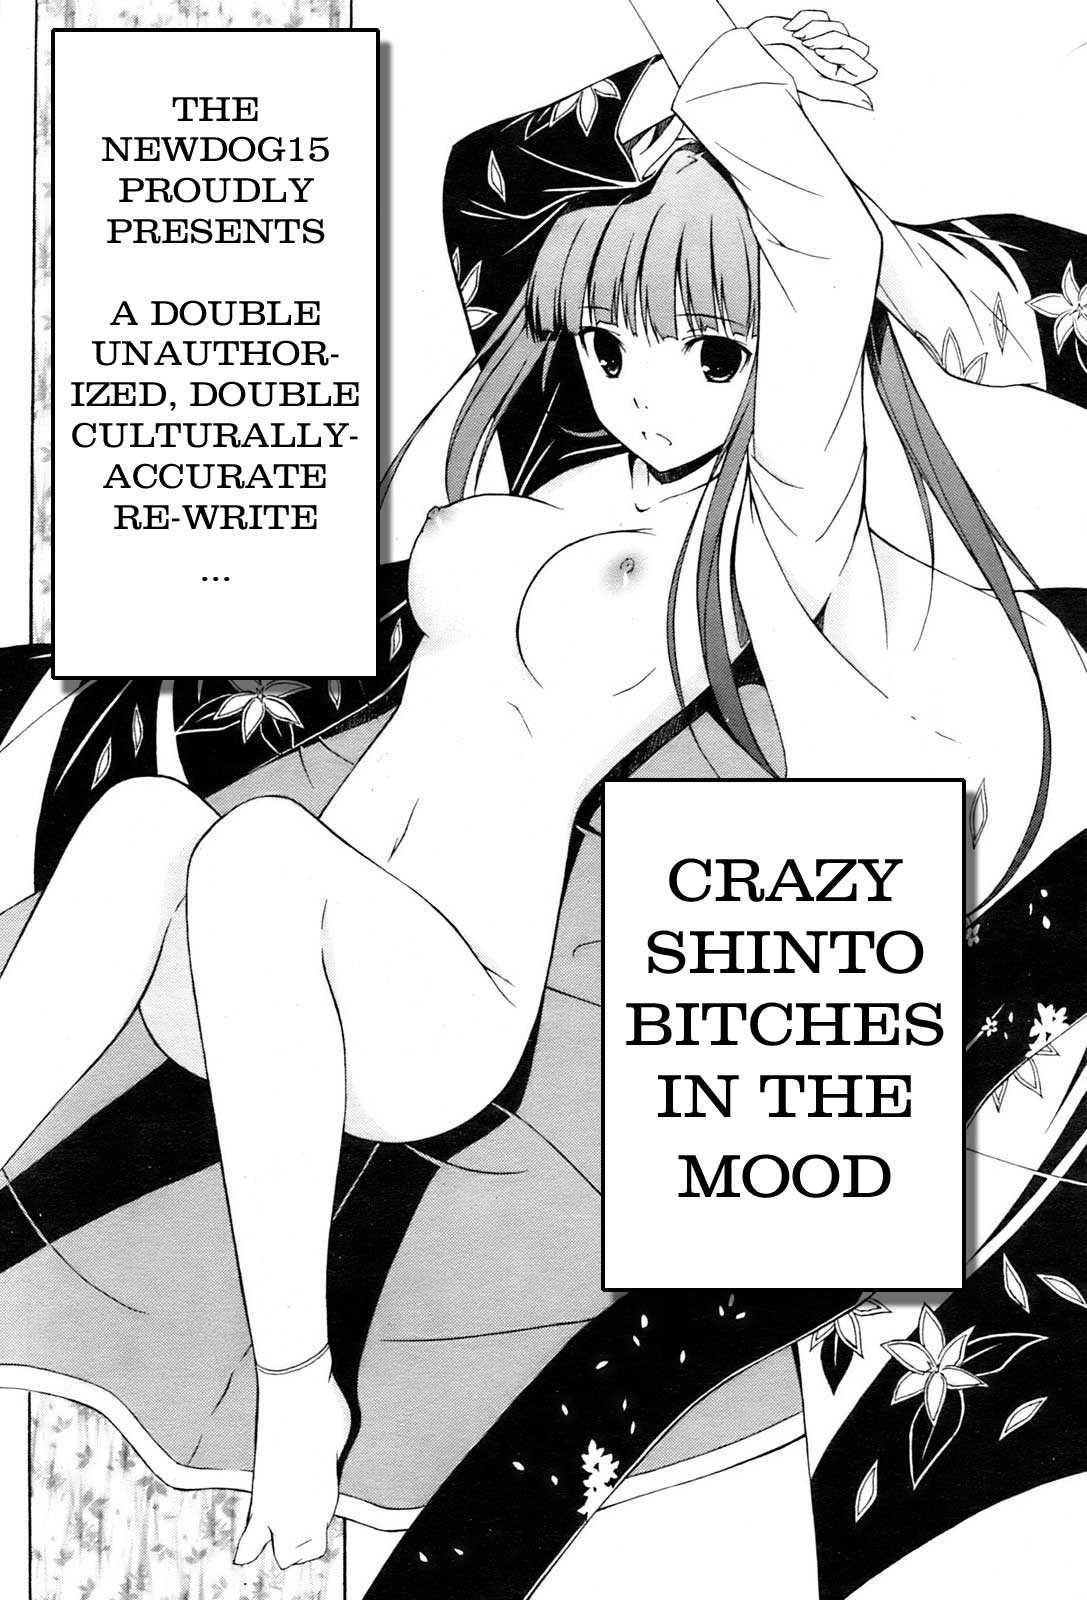 Crazy Shinto Bitches in the Mood [English Rewrite] [Newdog15] 